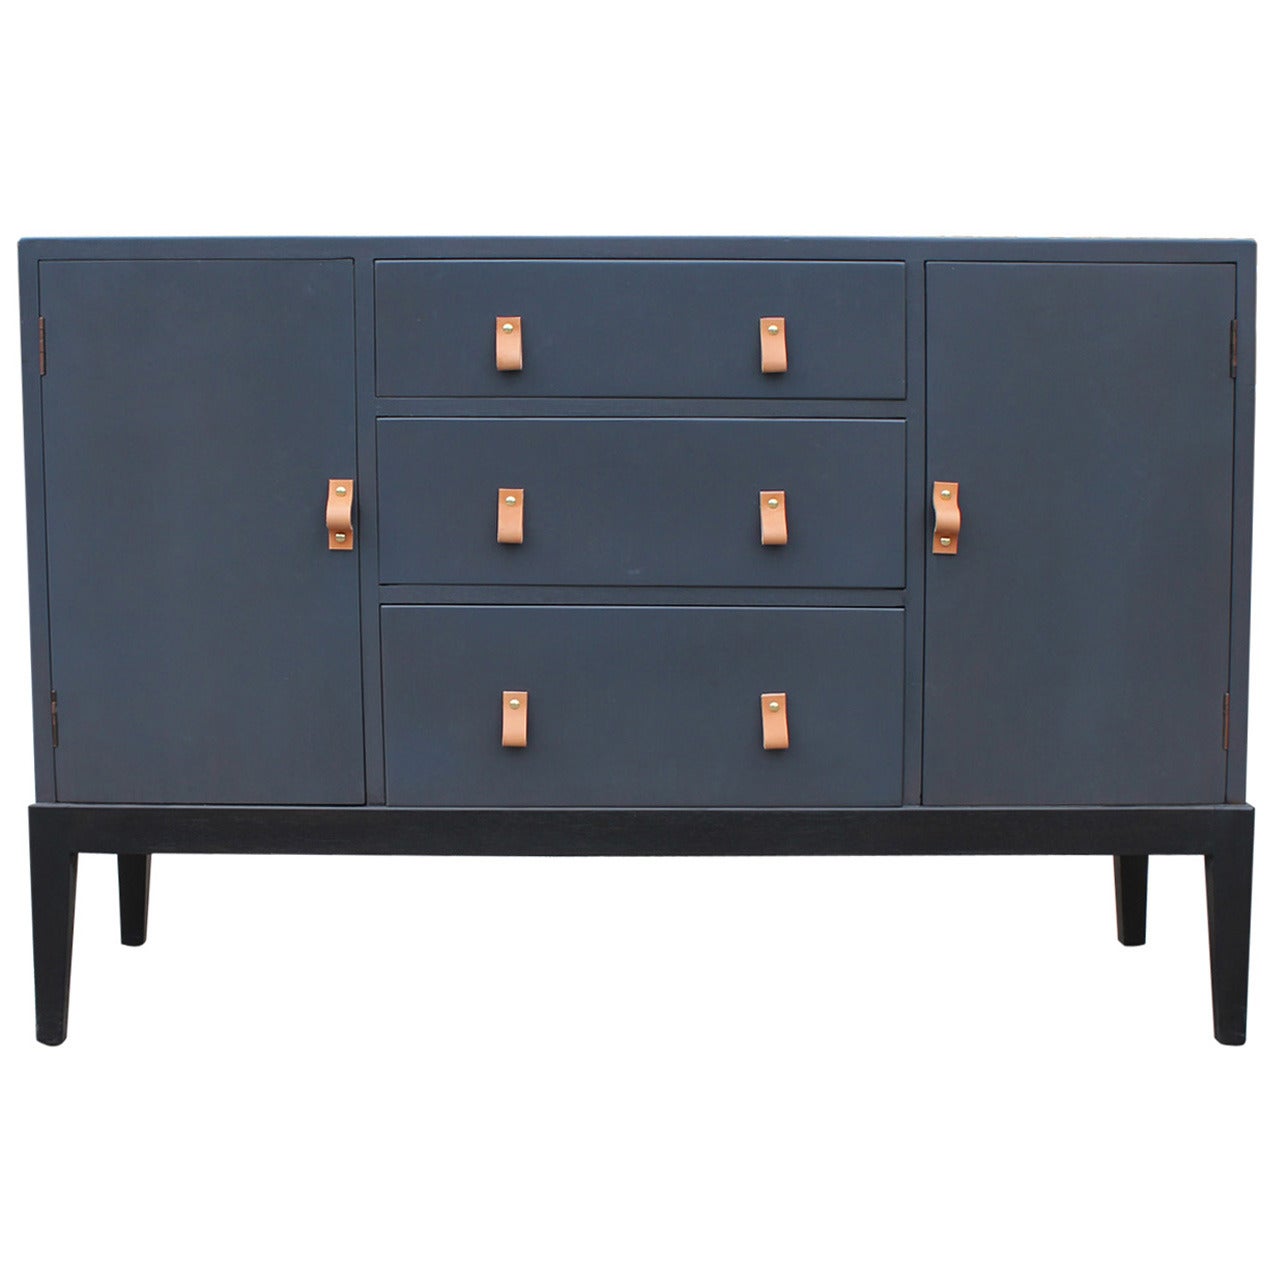 Superb Grey Sideboard or Buffet with Leather Handles